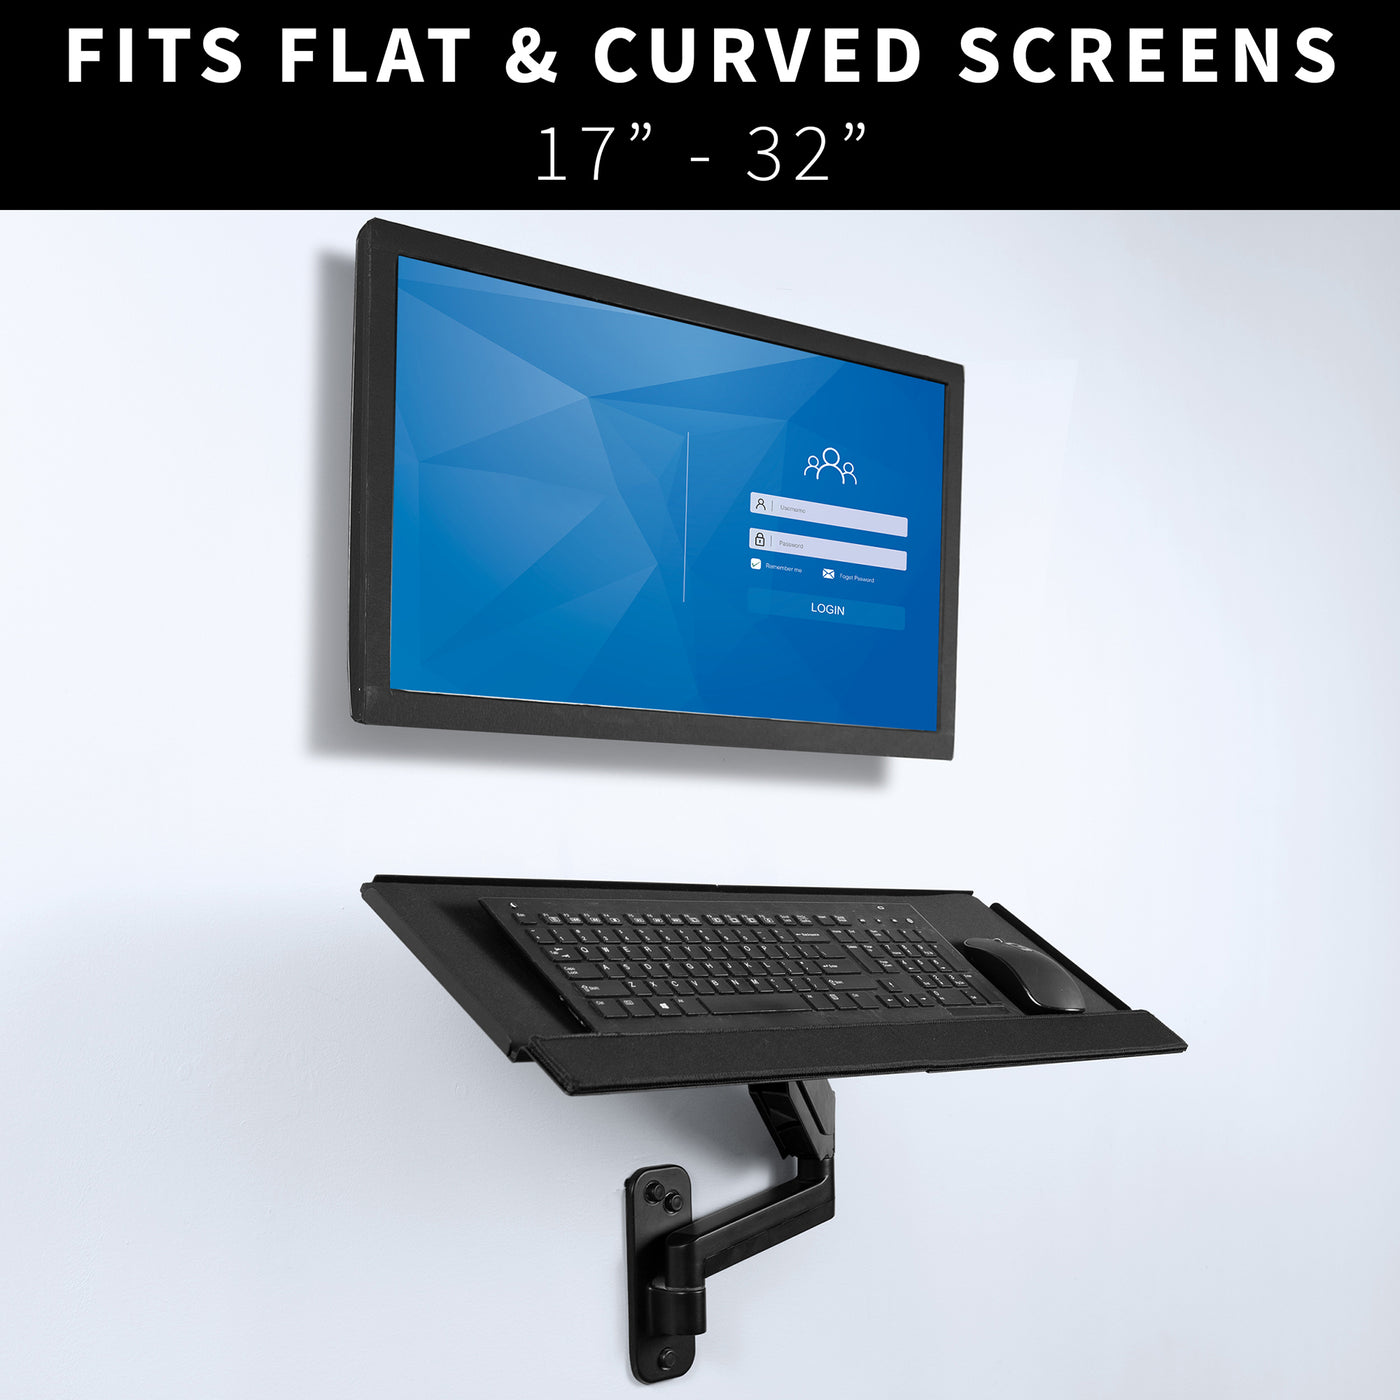 Wall monitor mount with height adjustment fits screens measuring 17 to 32 inches.